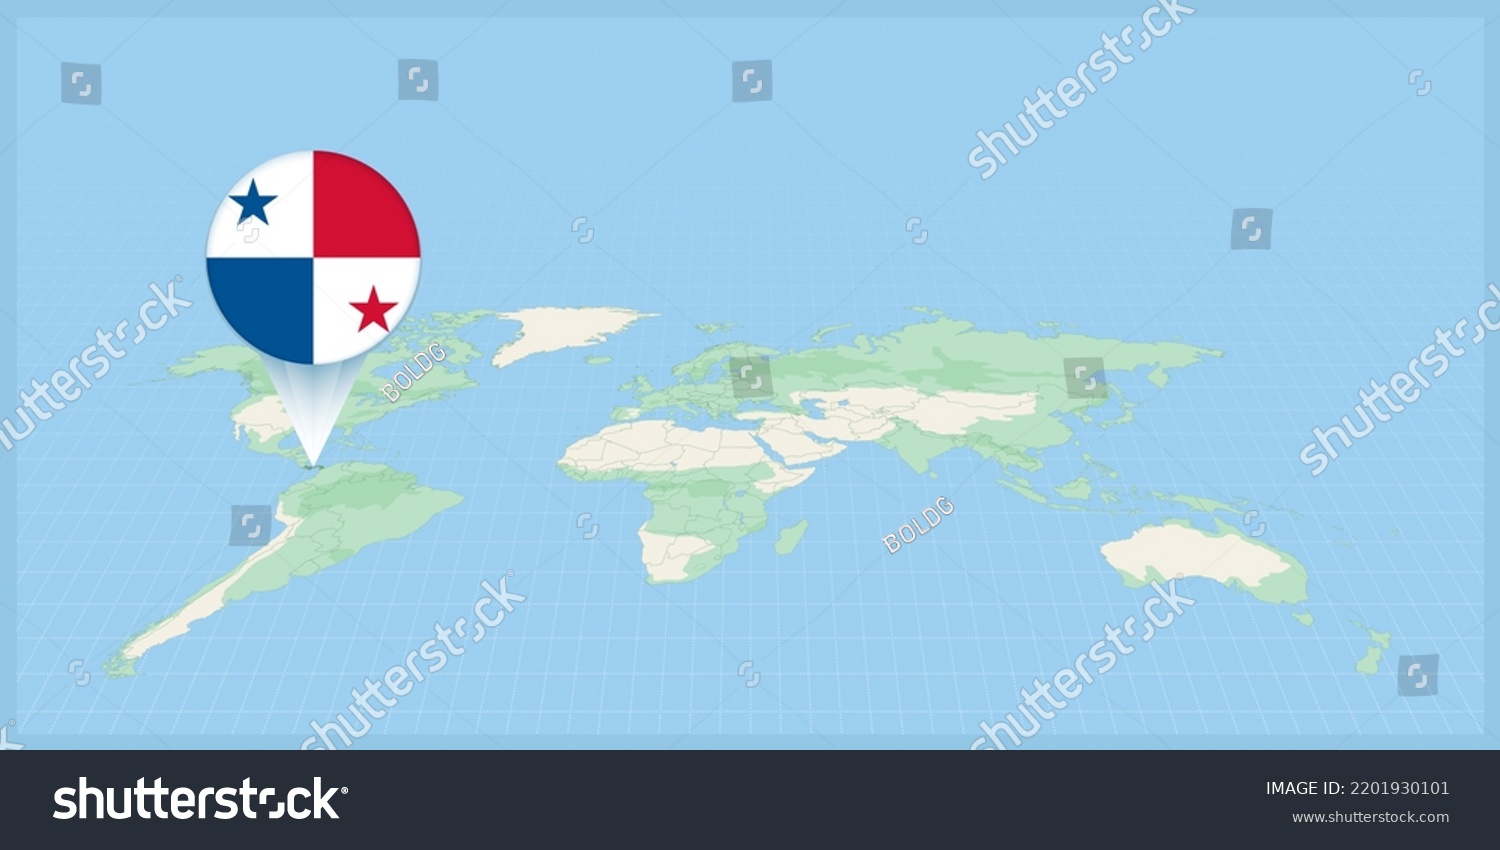 Stock Vector Location Of Panama On The World Map Marked With Panama Flag Pin Cartographic Vector Illustration 2201930101 